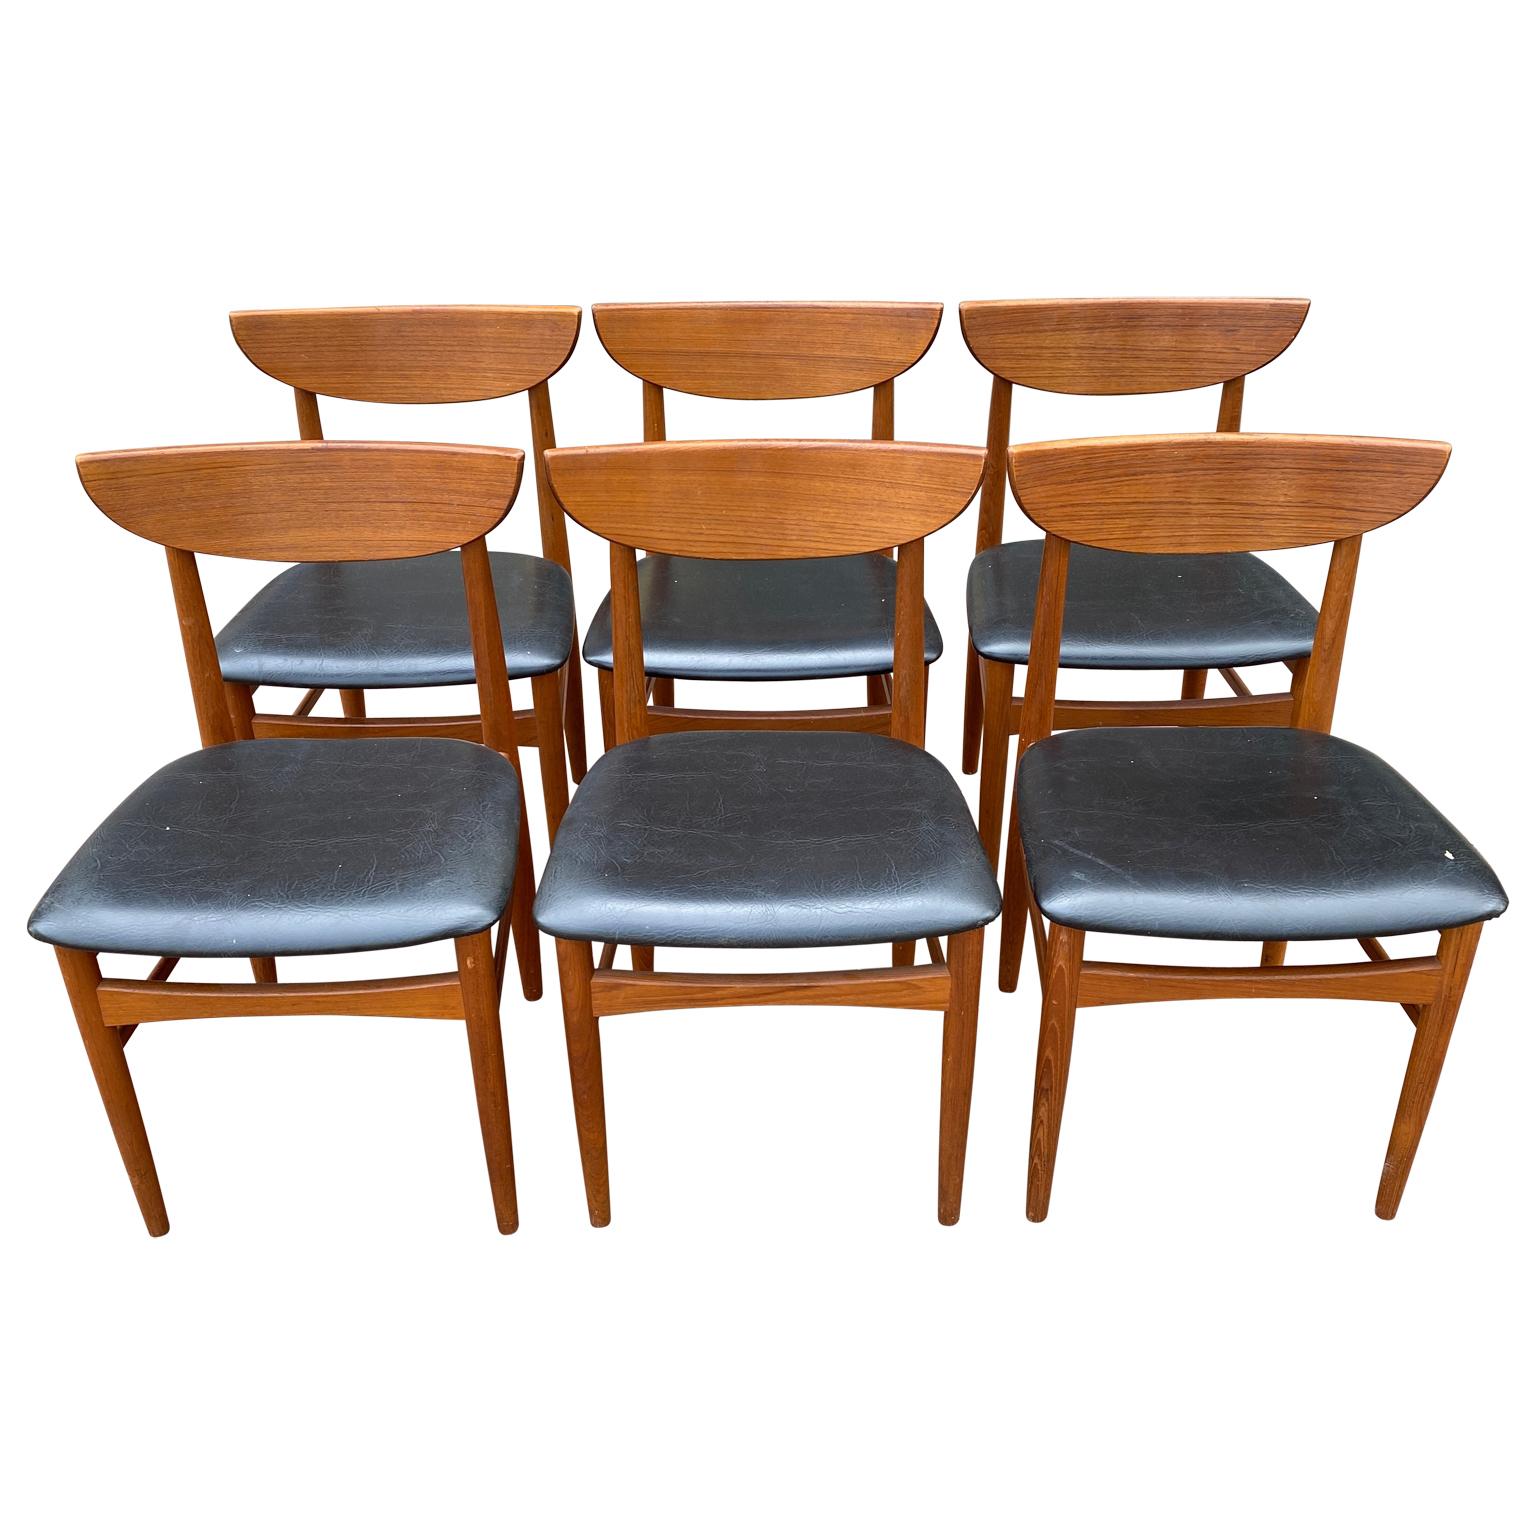 Mid-Century Modern Danish teak Dyrlund dining chairs. Complete set of eight dining chairs with black leatherette seats in very good condition. All eight chairs are without arms making them easily comfortable to fit into any dining table. The teak is